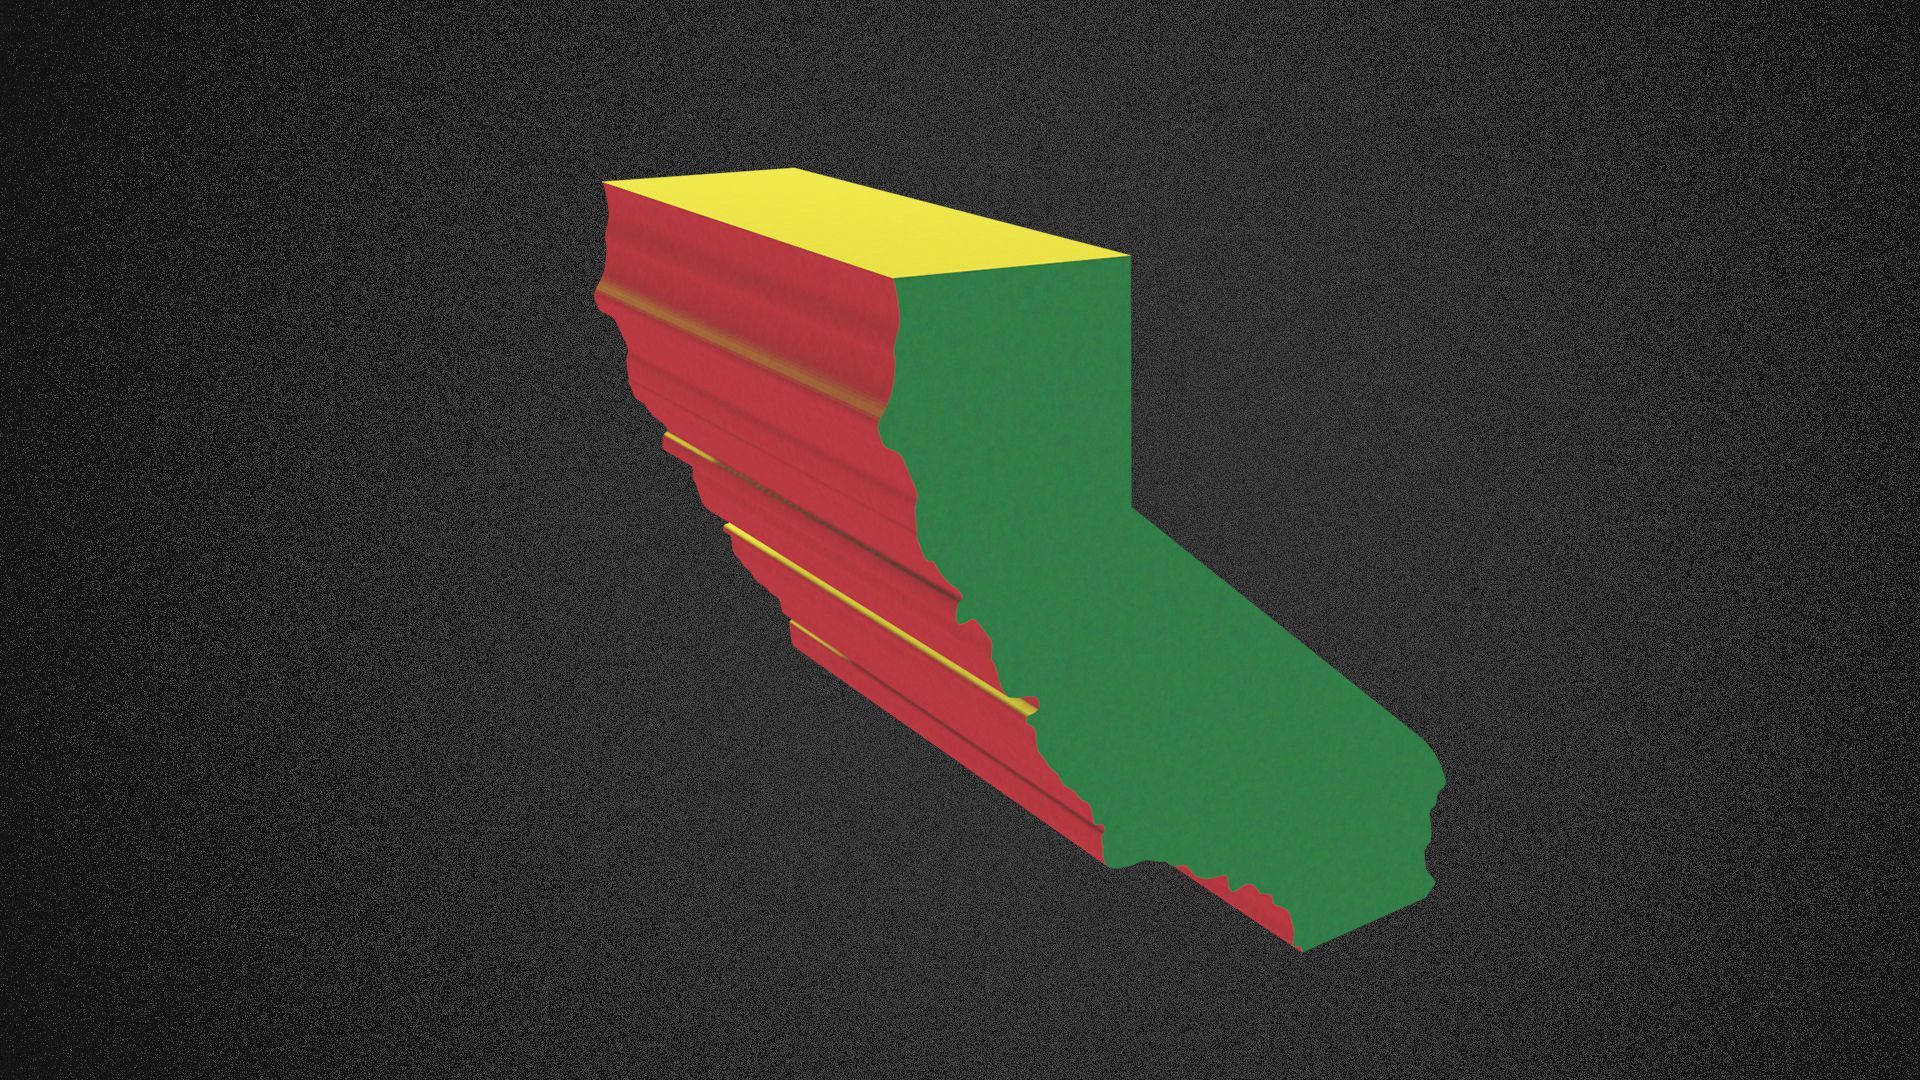 Illustration of the state of California lit by red, green and yellow lights.